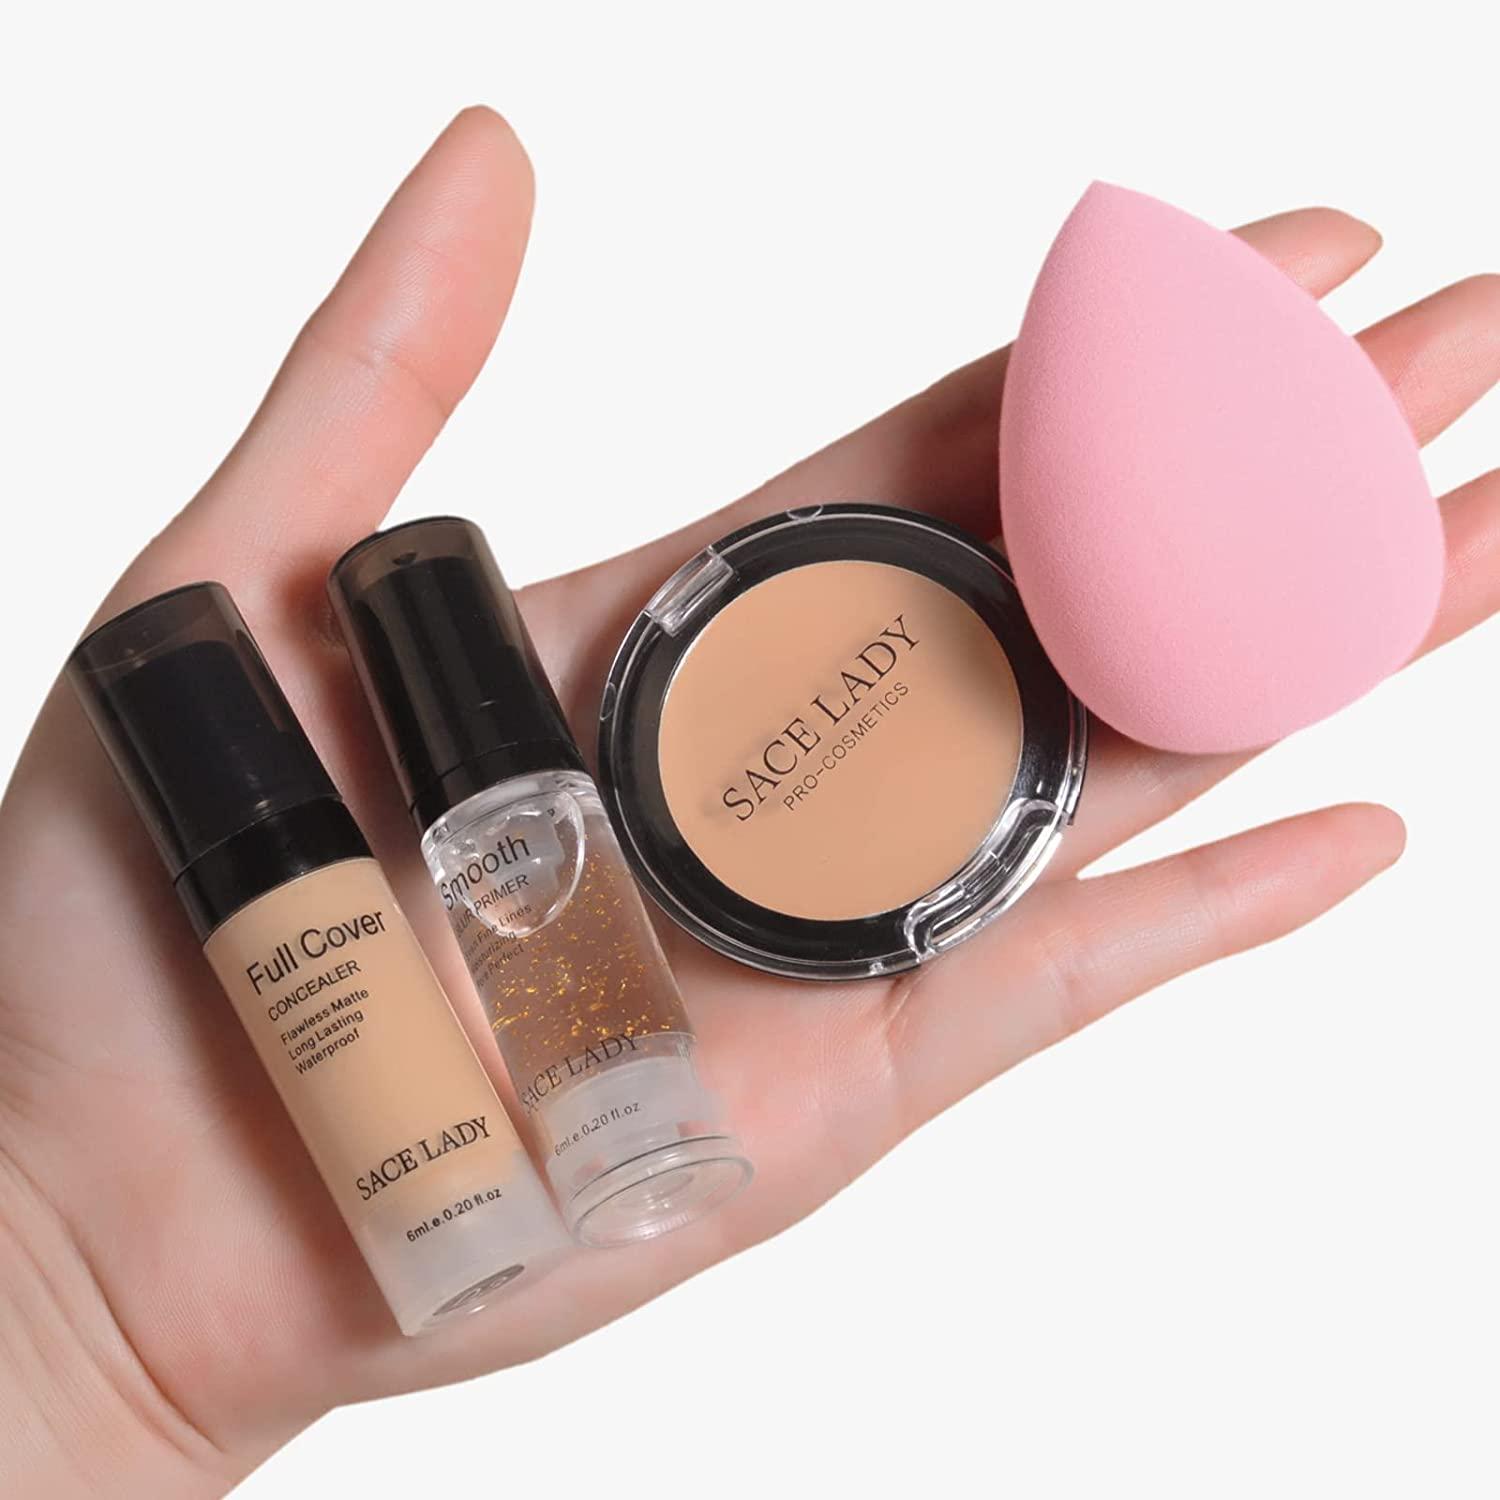 Waterproof Full Coverage Concealer Makeup Kit with Primer Sponge - Matte  Liquid Foundation for Face, Eye, and Acne Scar Cover